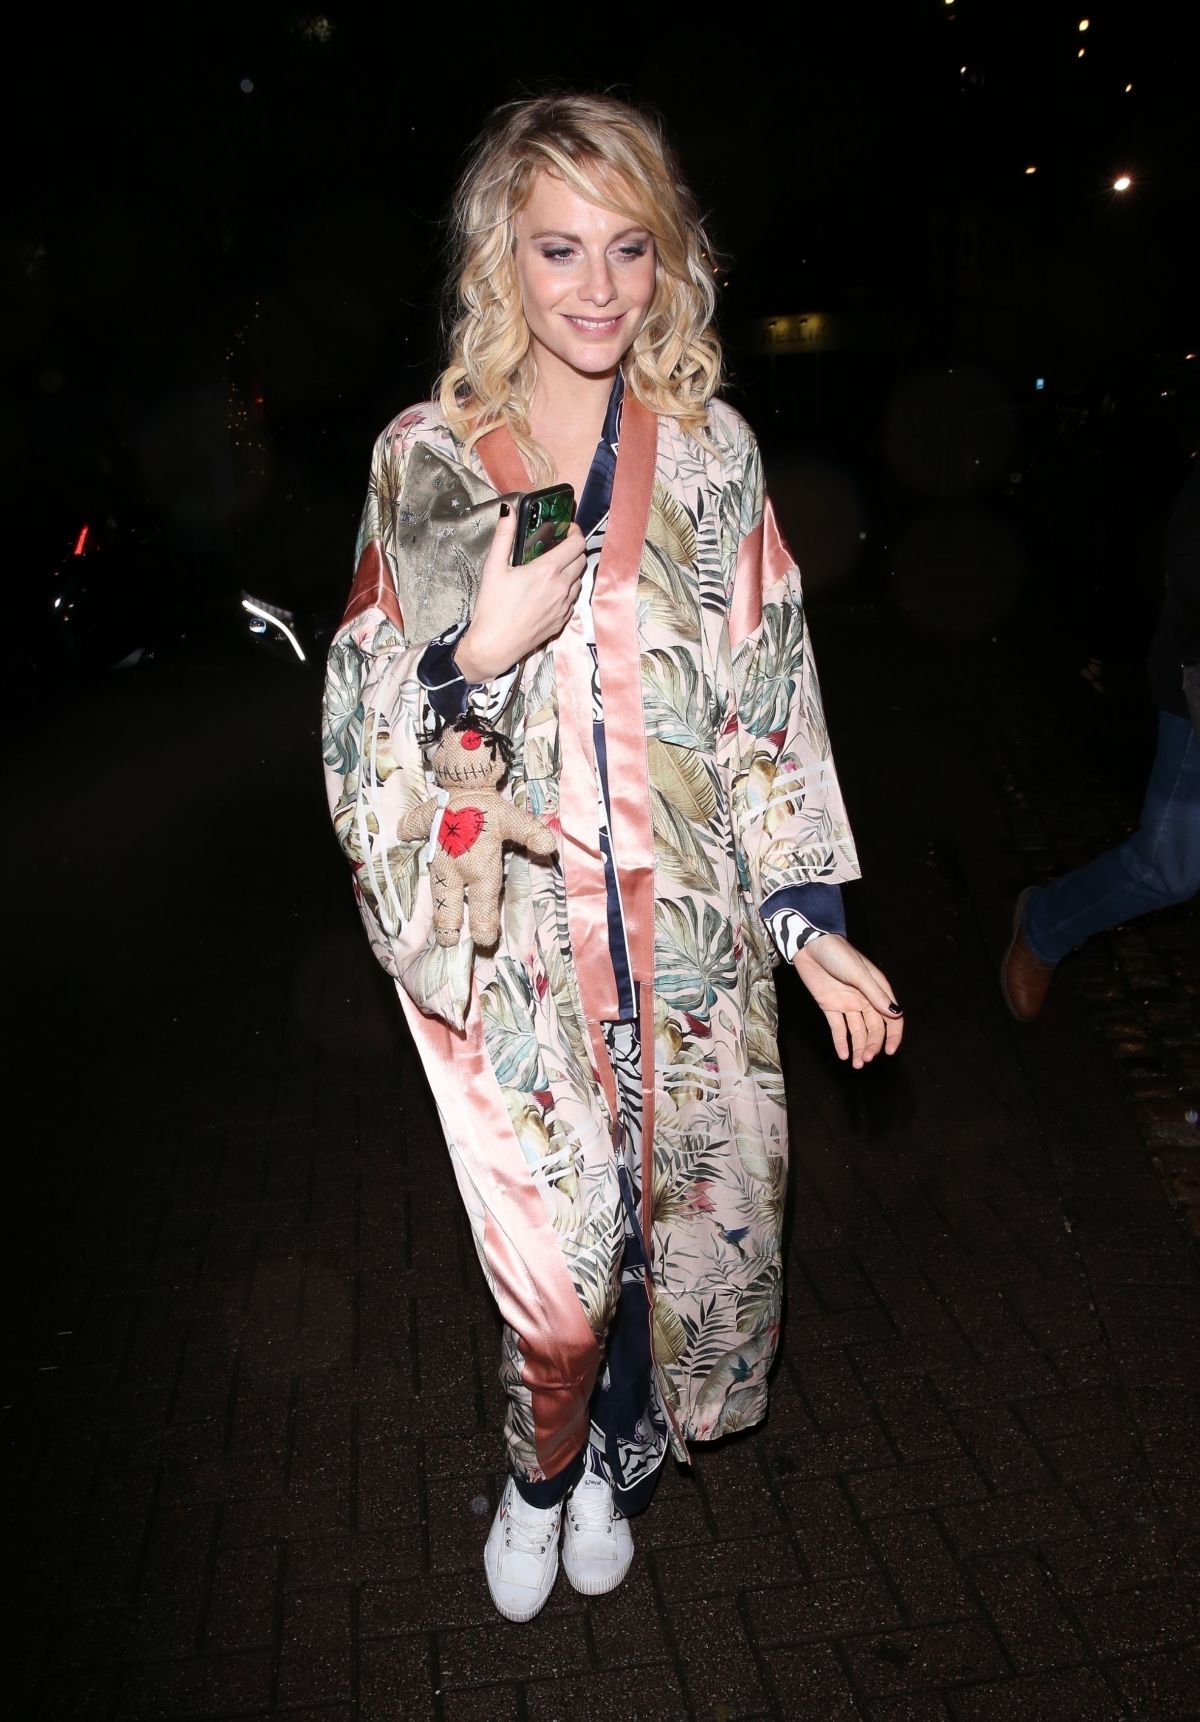 poppy-delevingne-at-laylow-halloween-party-in-london-10-31-2018-2.jpg